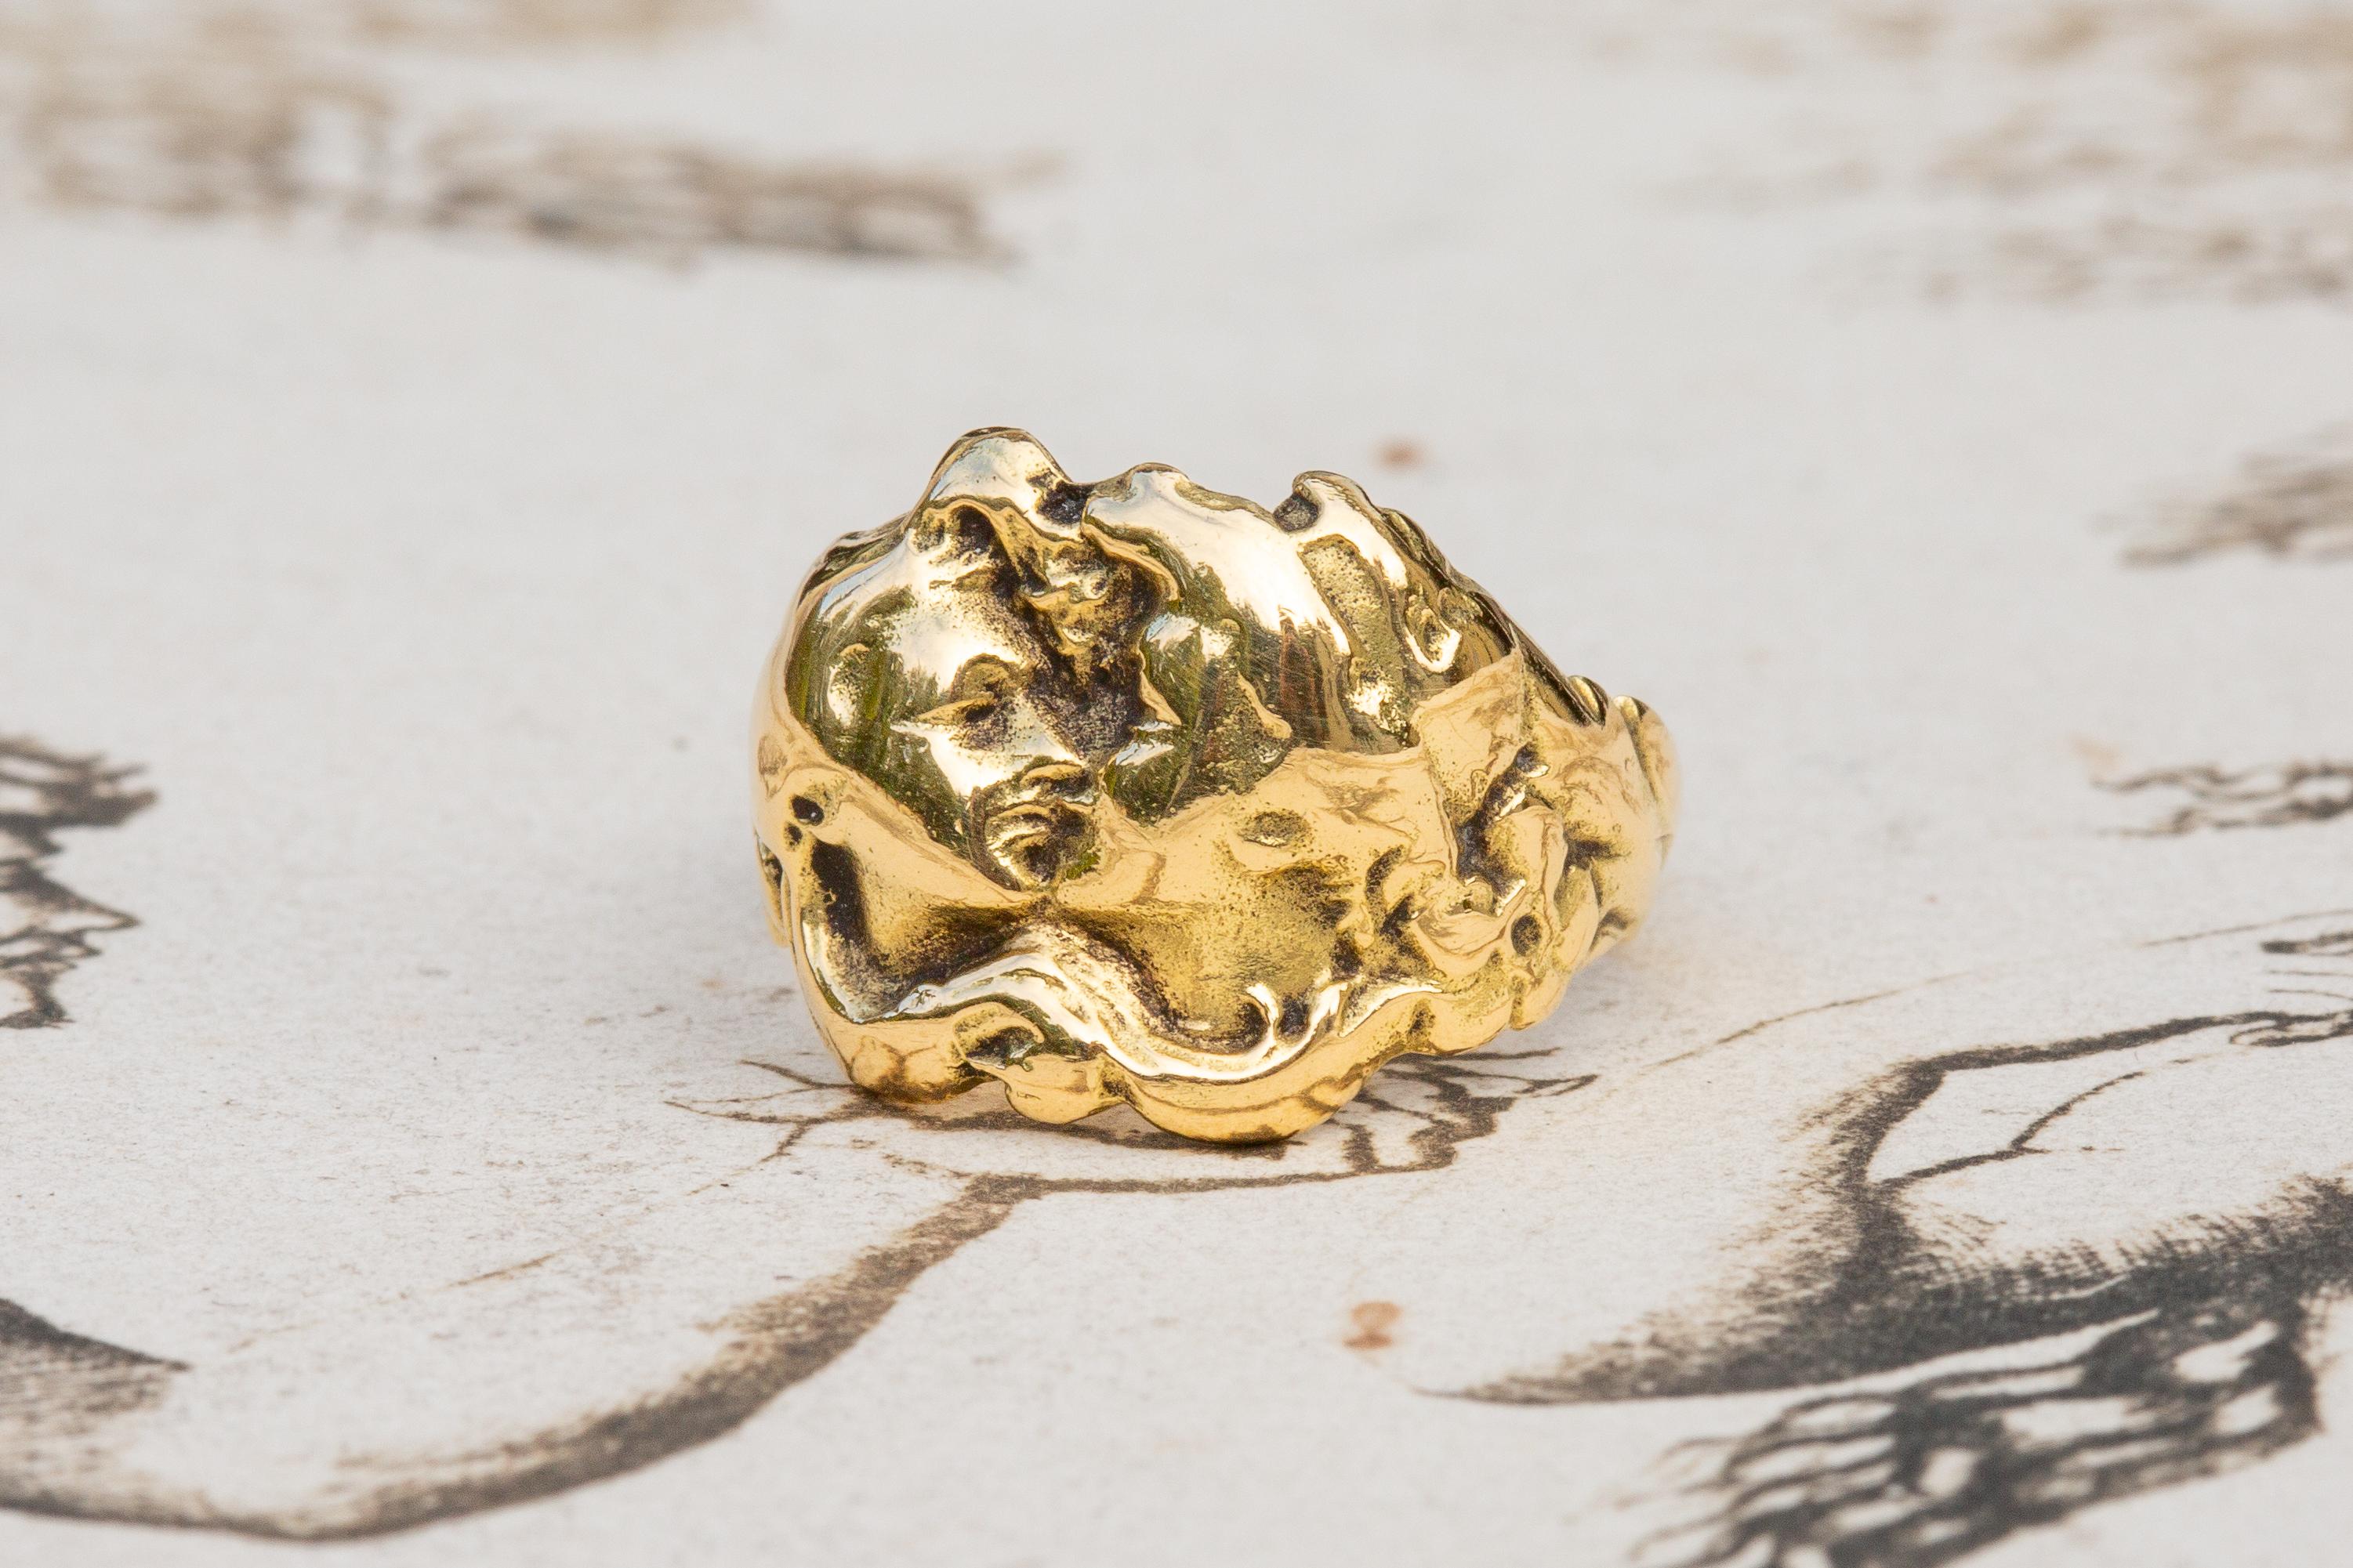  French Antique Art Nouveau 18K Gold Ethereal Figural Kissing Ring c.1910 4